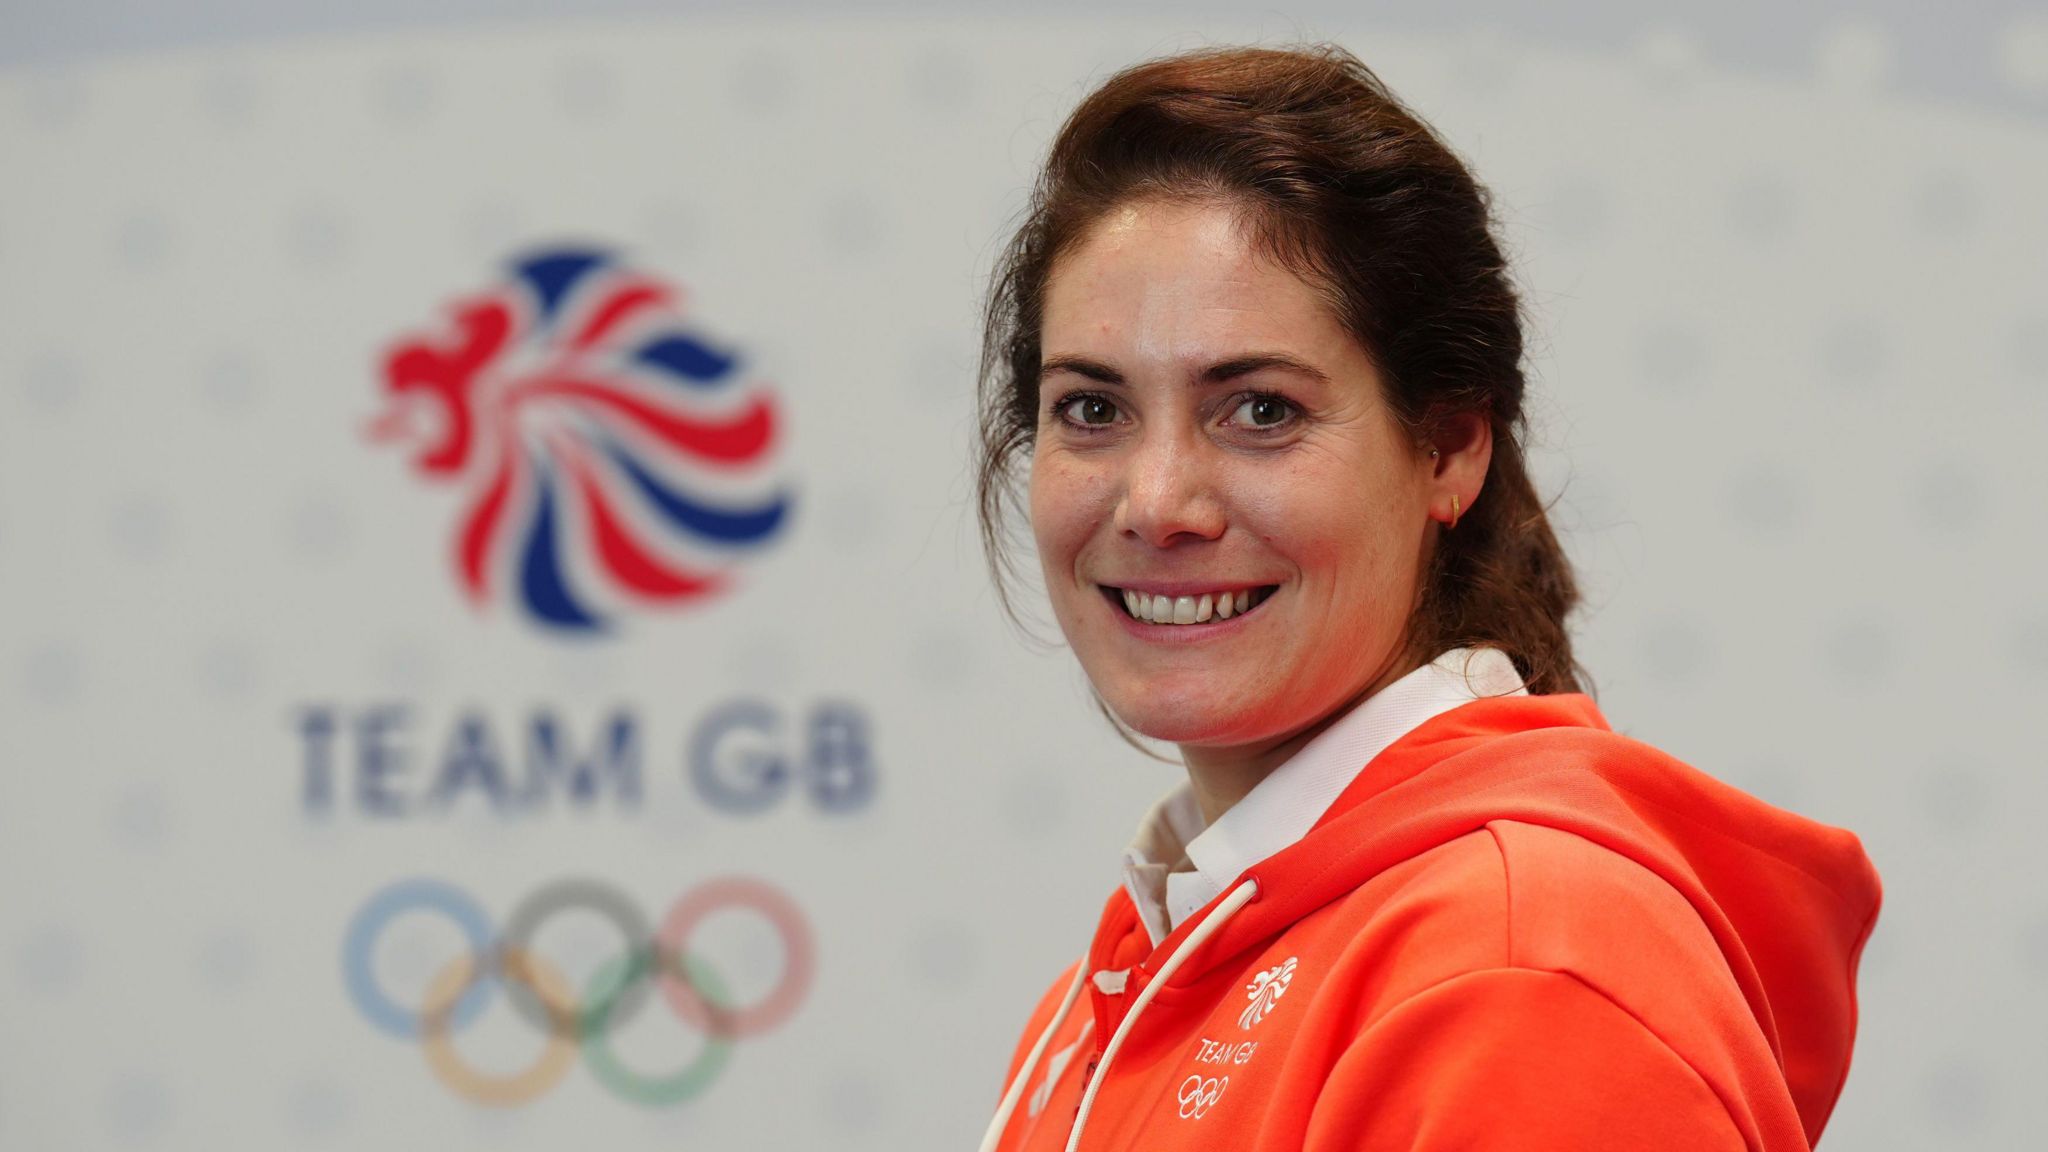 Kate French wearing a neon orange Team GB hoodie with the Team GB and Olympic ring logos in the background. She is turned to the side, smiling at the camera and her brown hair is up in a ponytail.